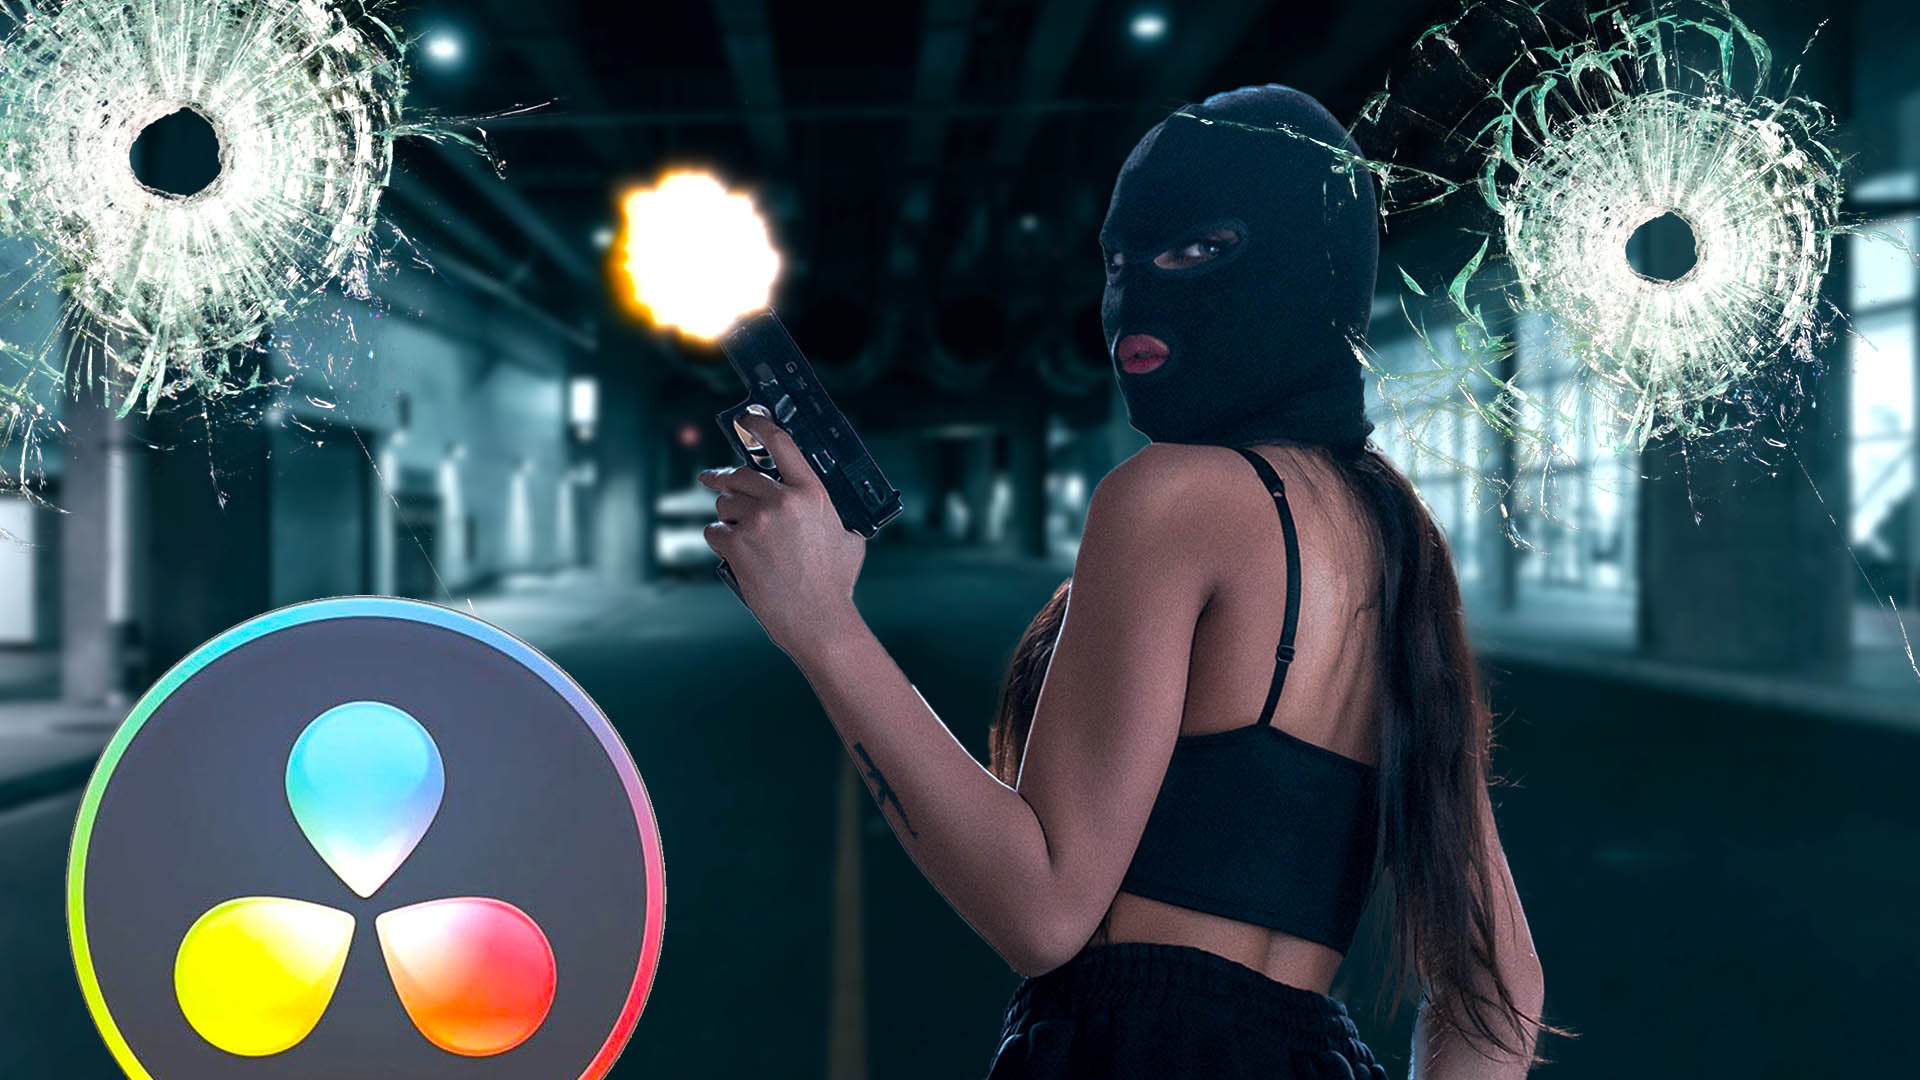 Create an Intense Action Scene in DaVinci Resolve with our Free Gun FX